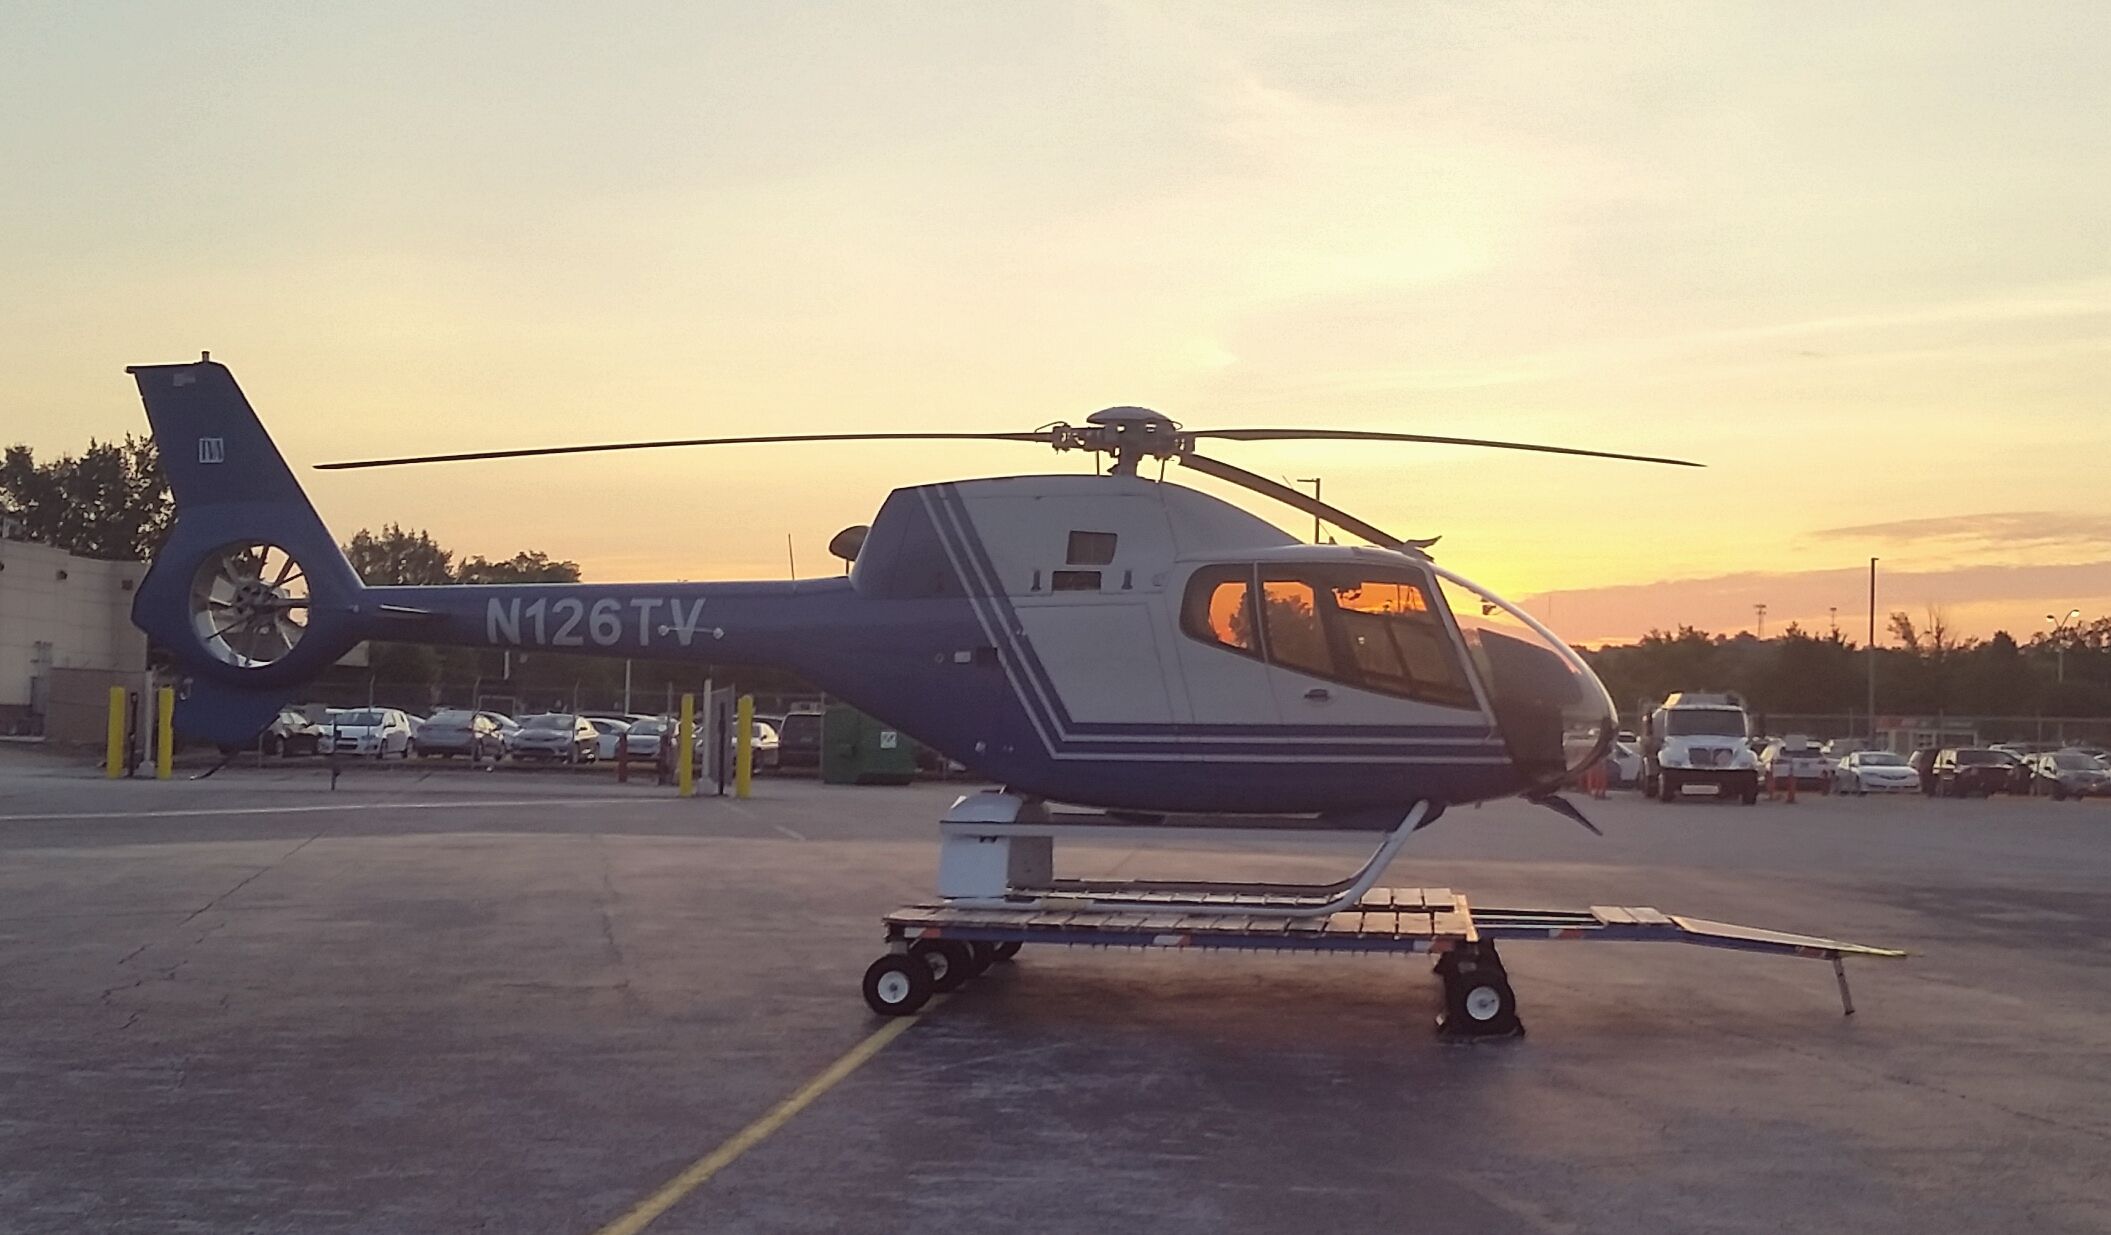 Eurocopter EC-120 Colibri (N126TV) - TVAs EC-120 ready for another day of work.